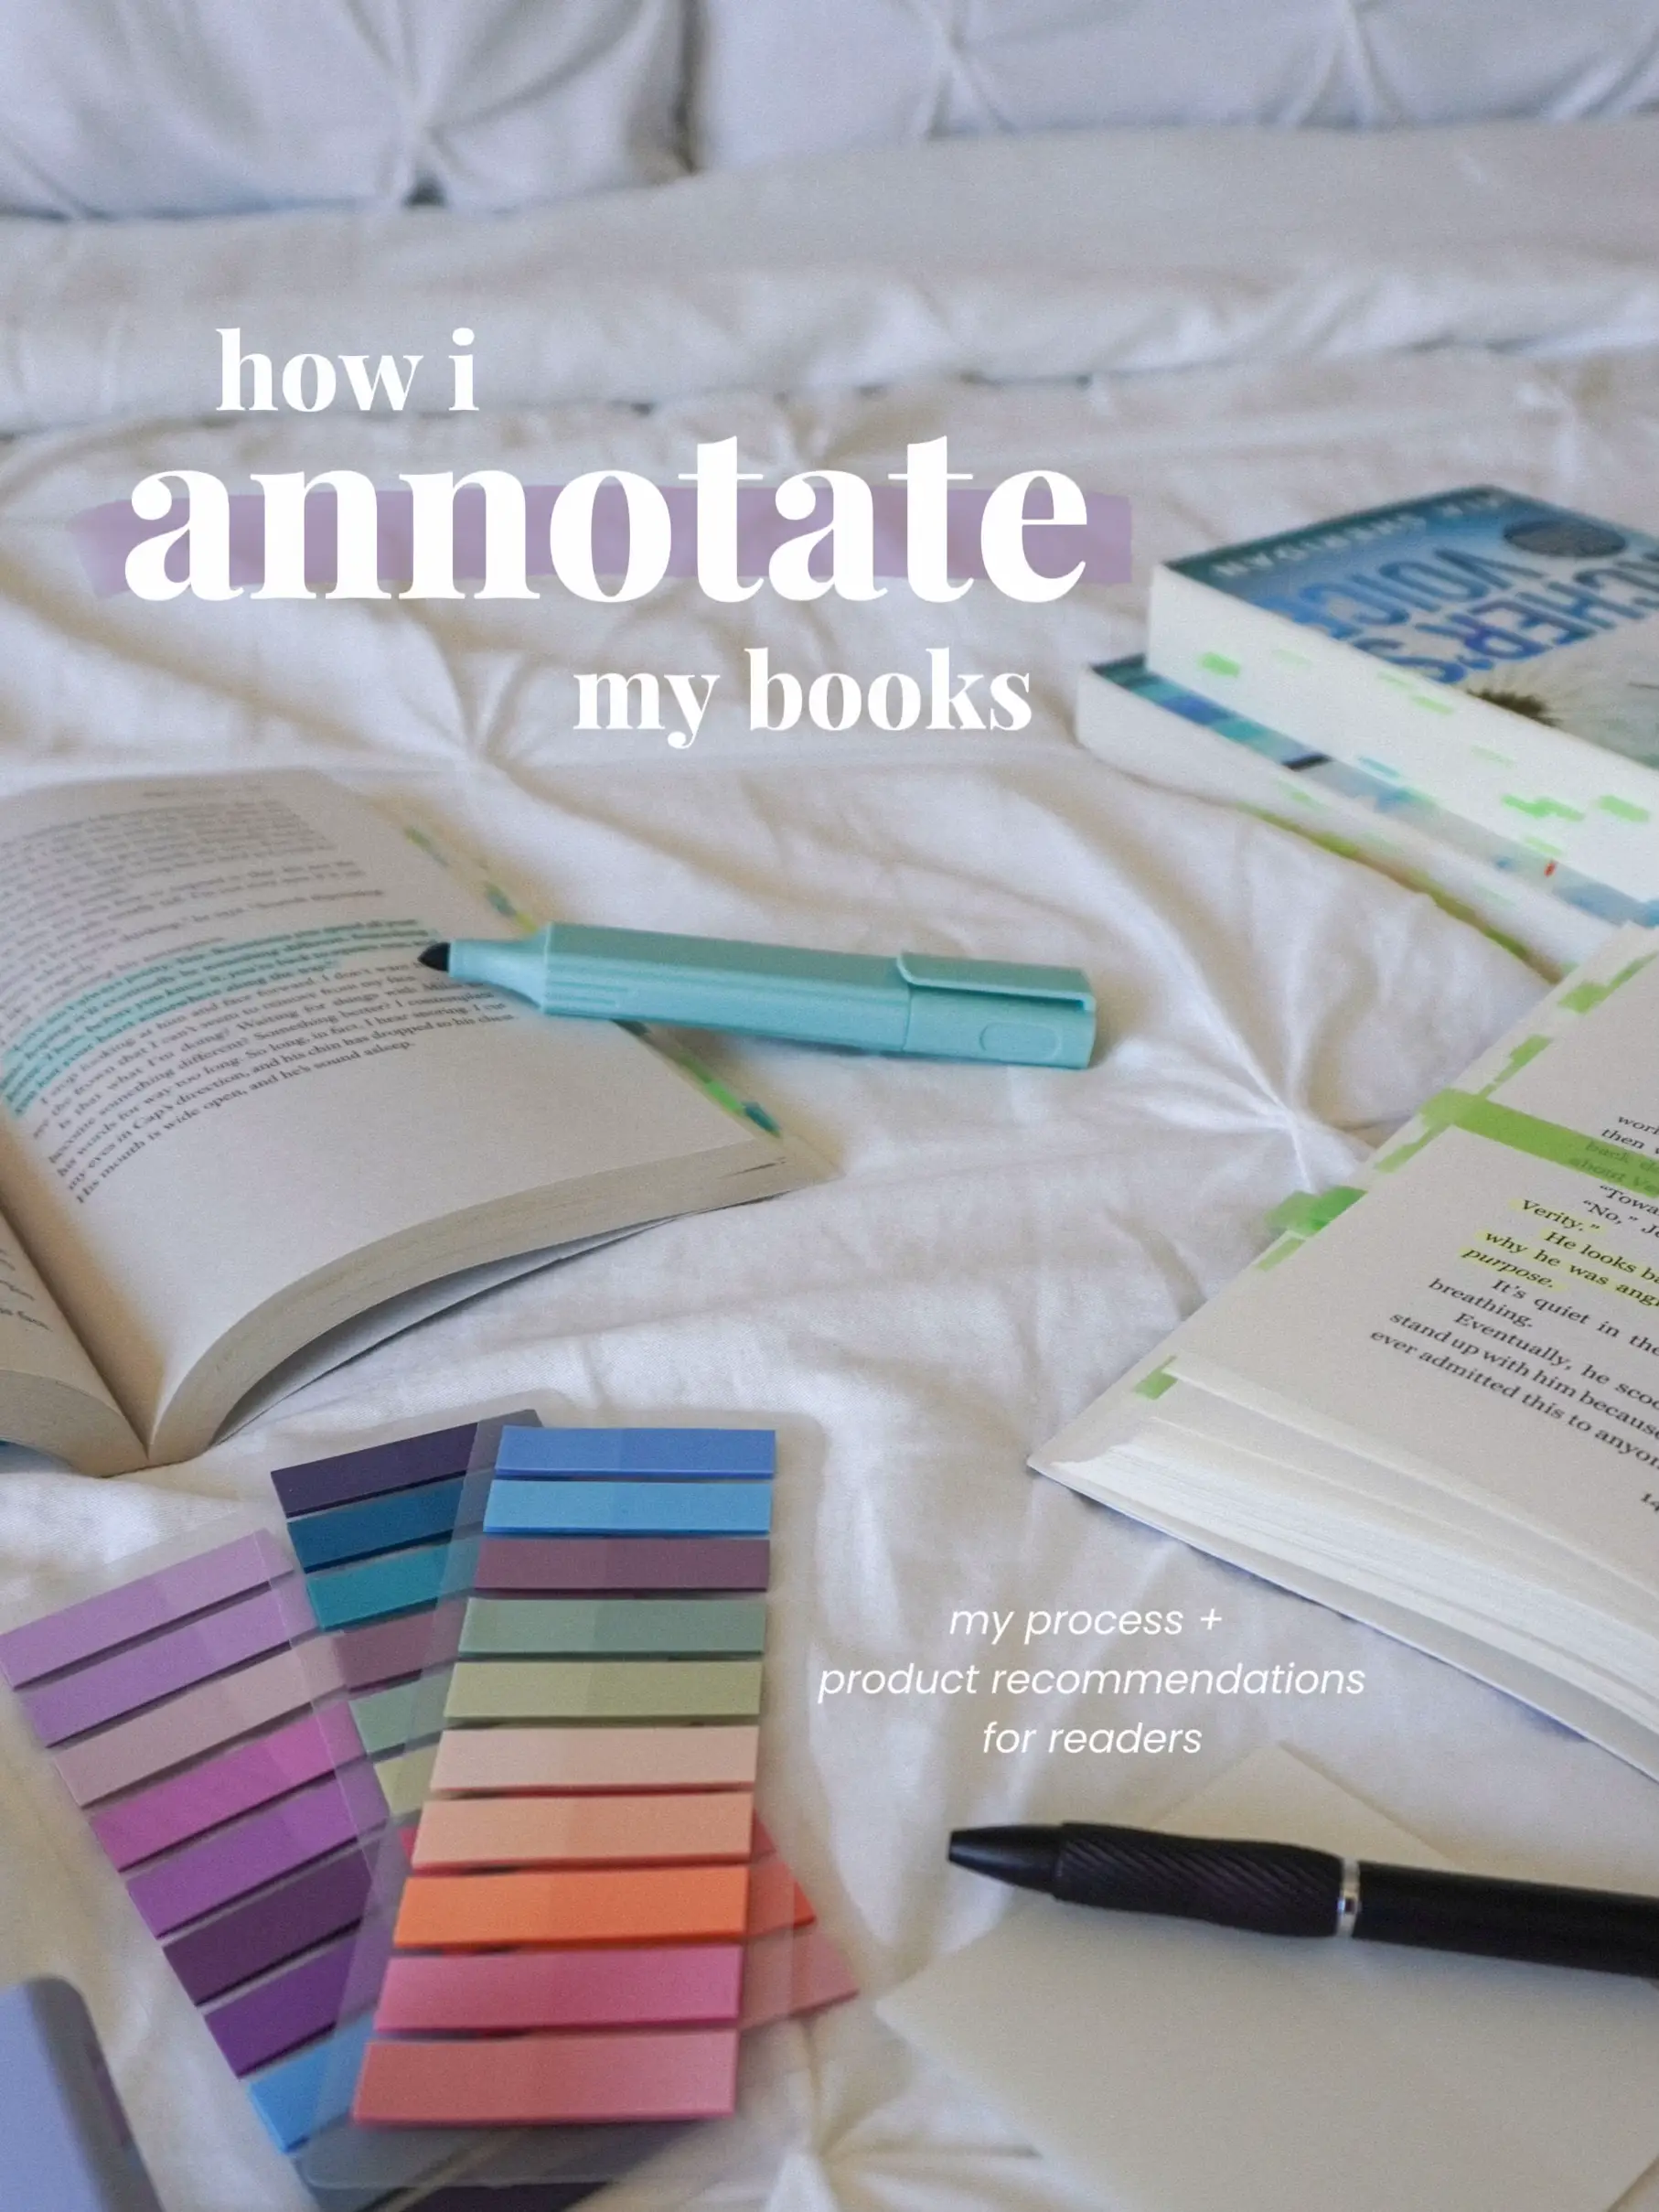 Small Annotation Kit Book Annotation Highlighter Tabs Pen Pencil